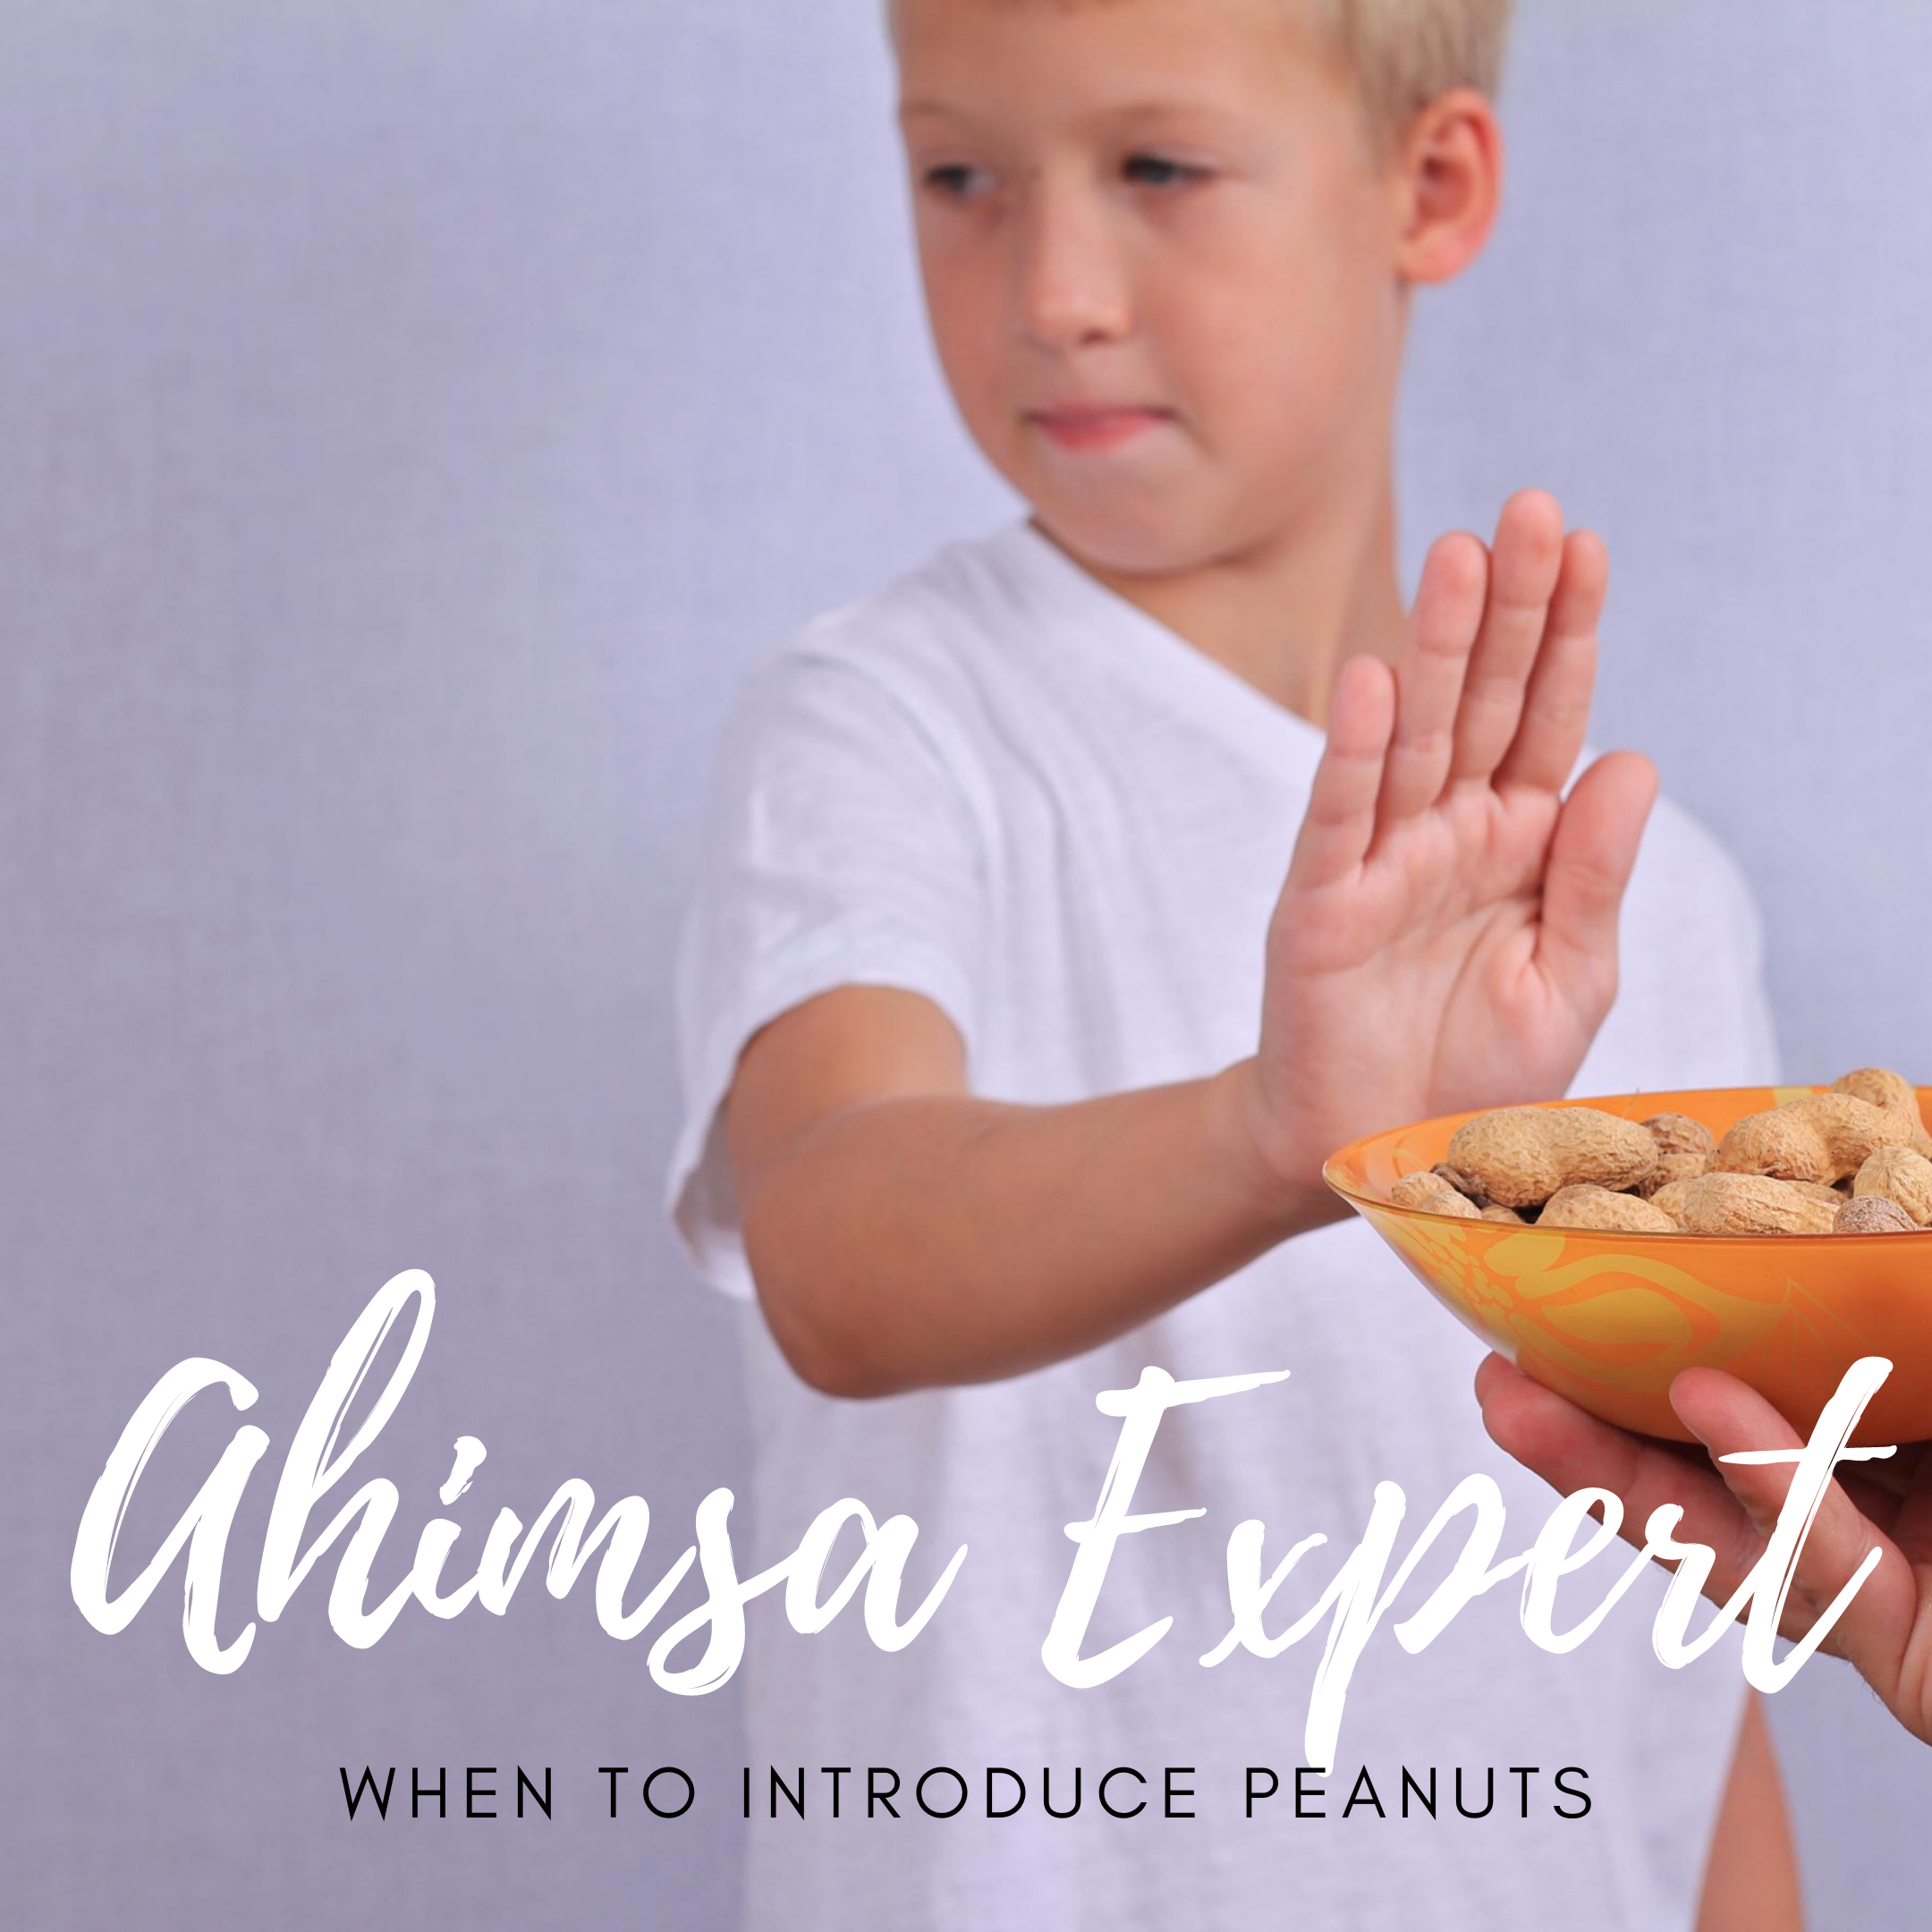 Children's food allergies - what you need to know when introducing peanuts